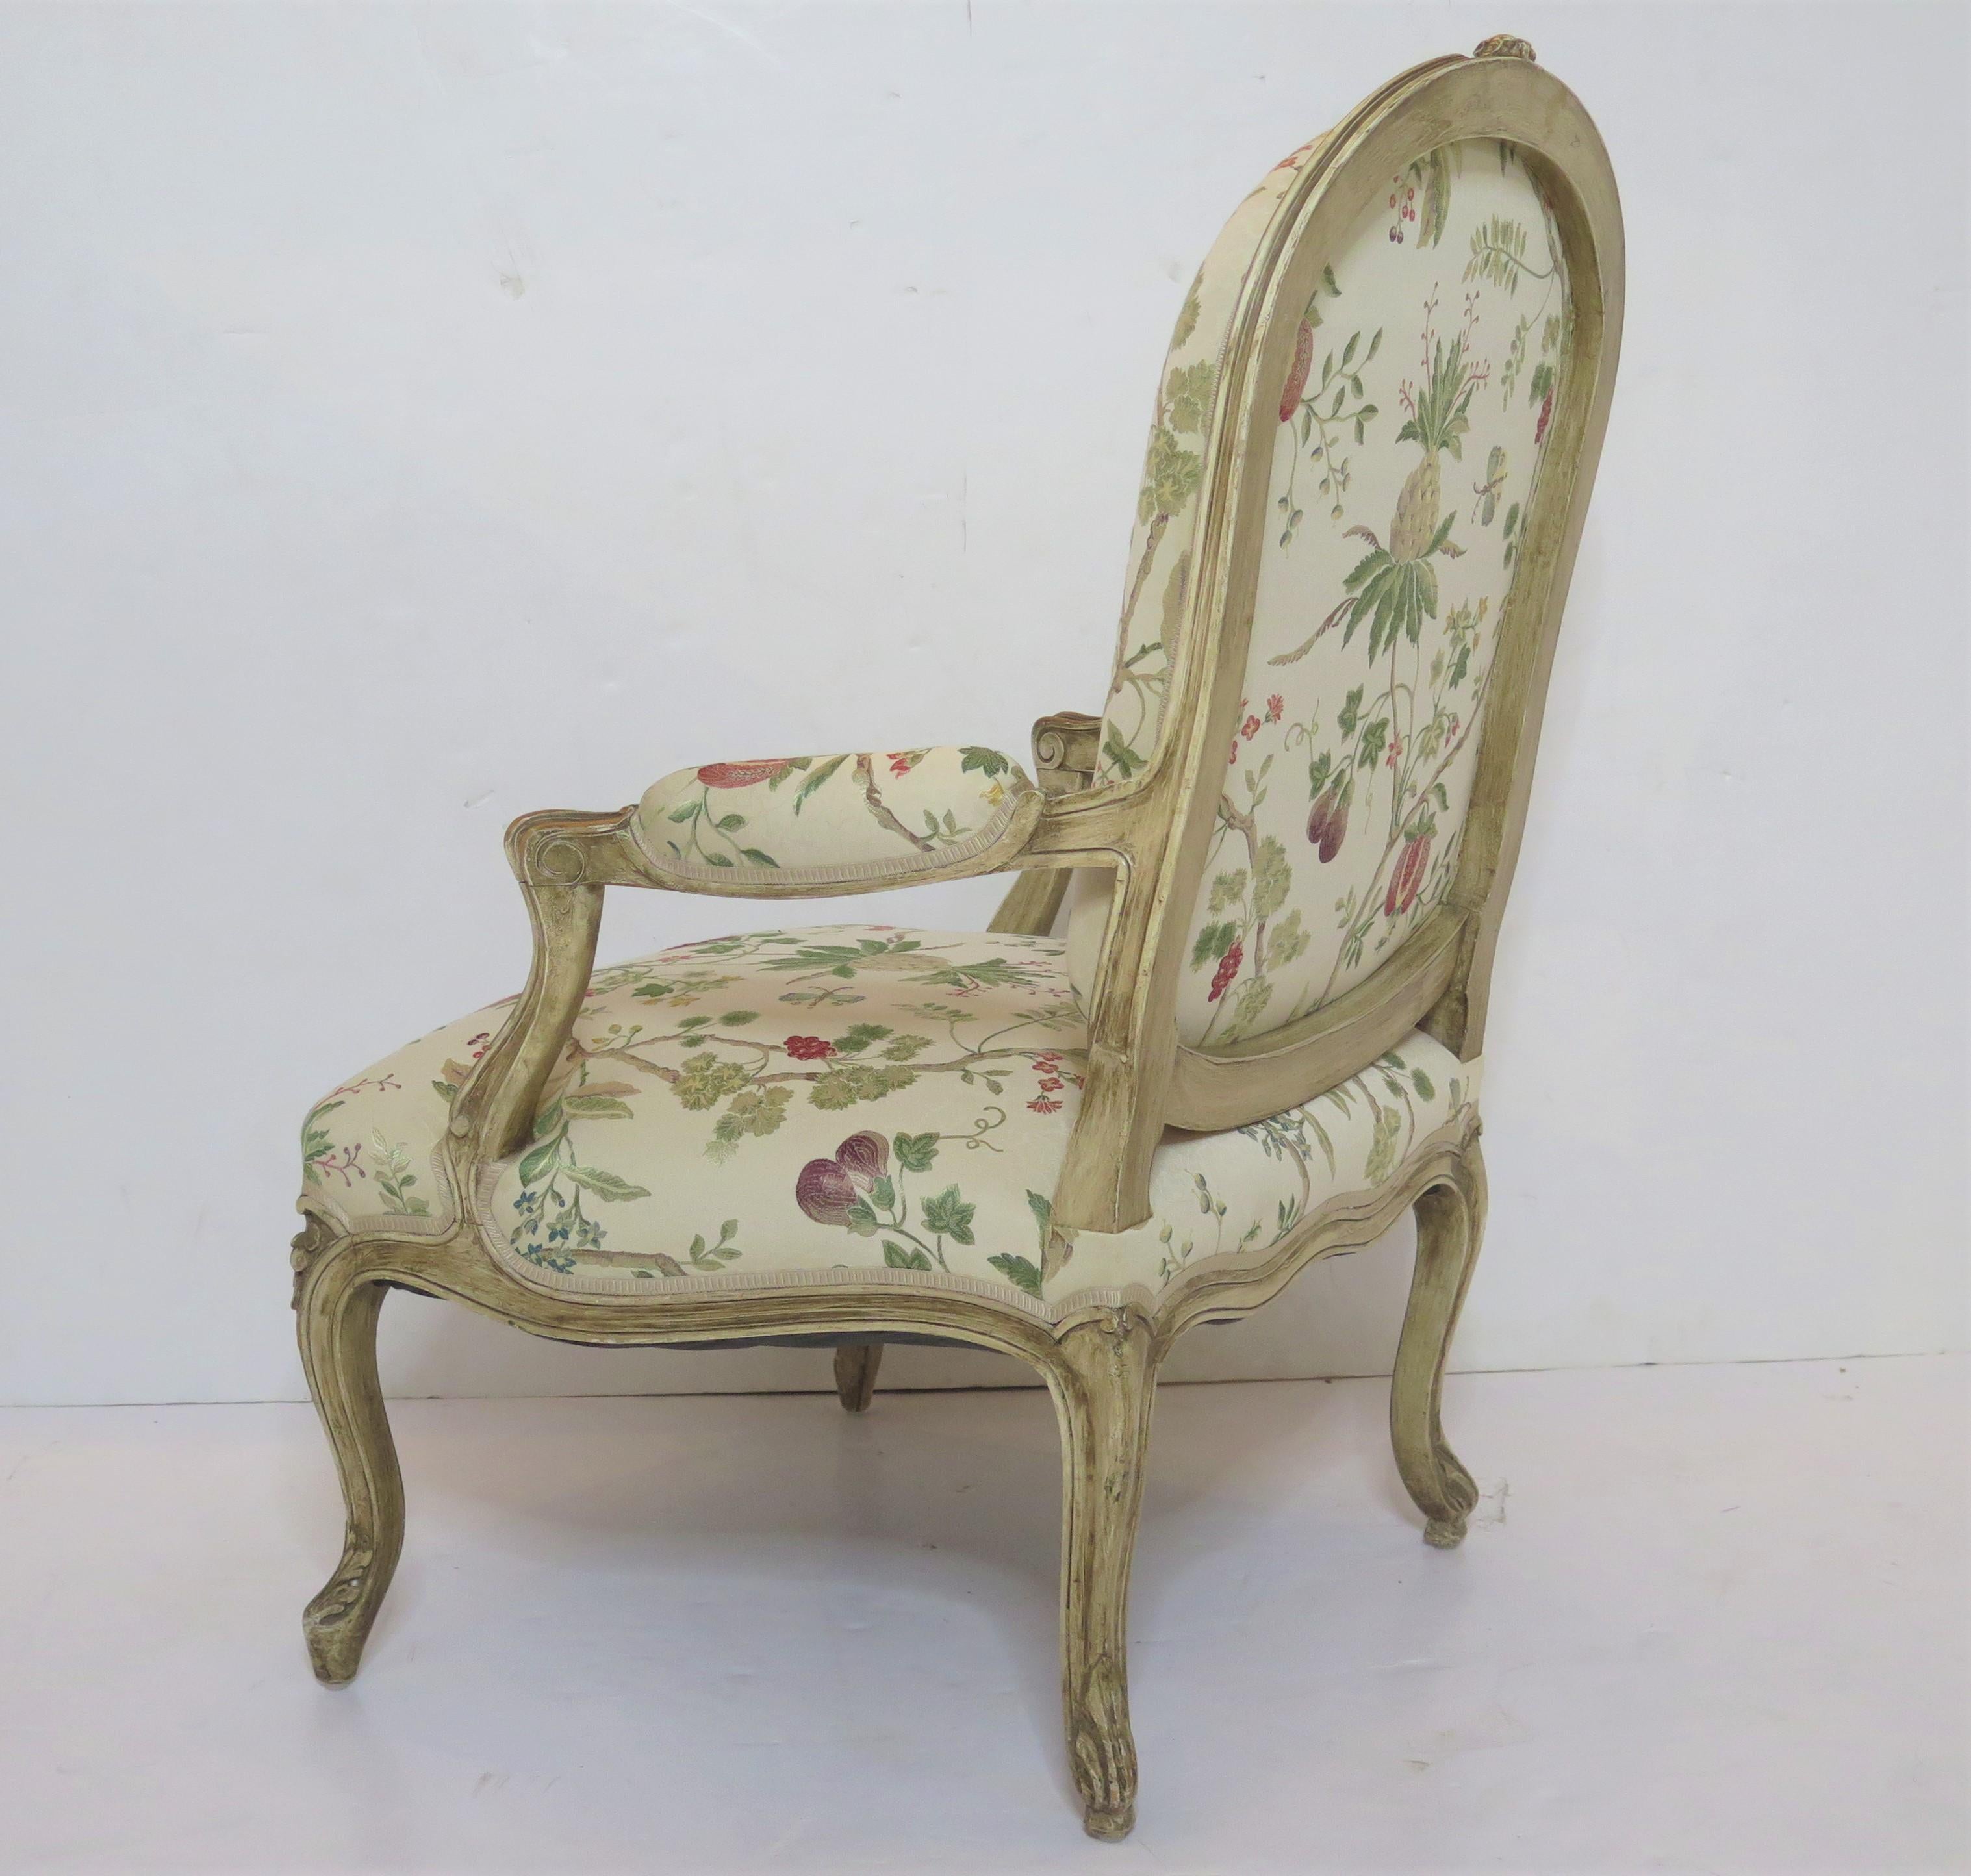 English Louis XV-Style Painted Fauteuil in La Perouse by Scalamandré For Sale